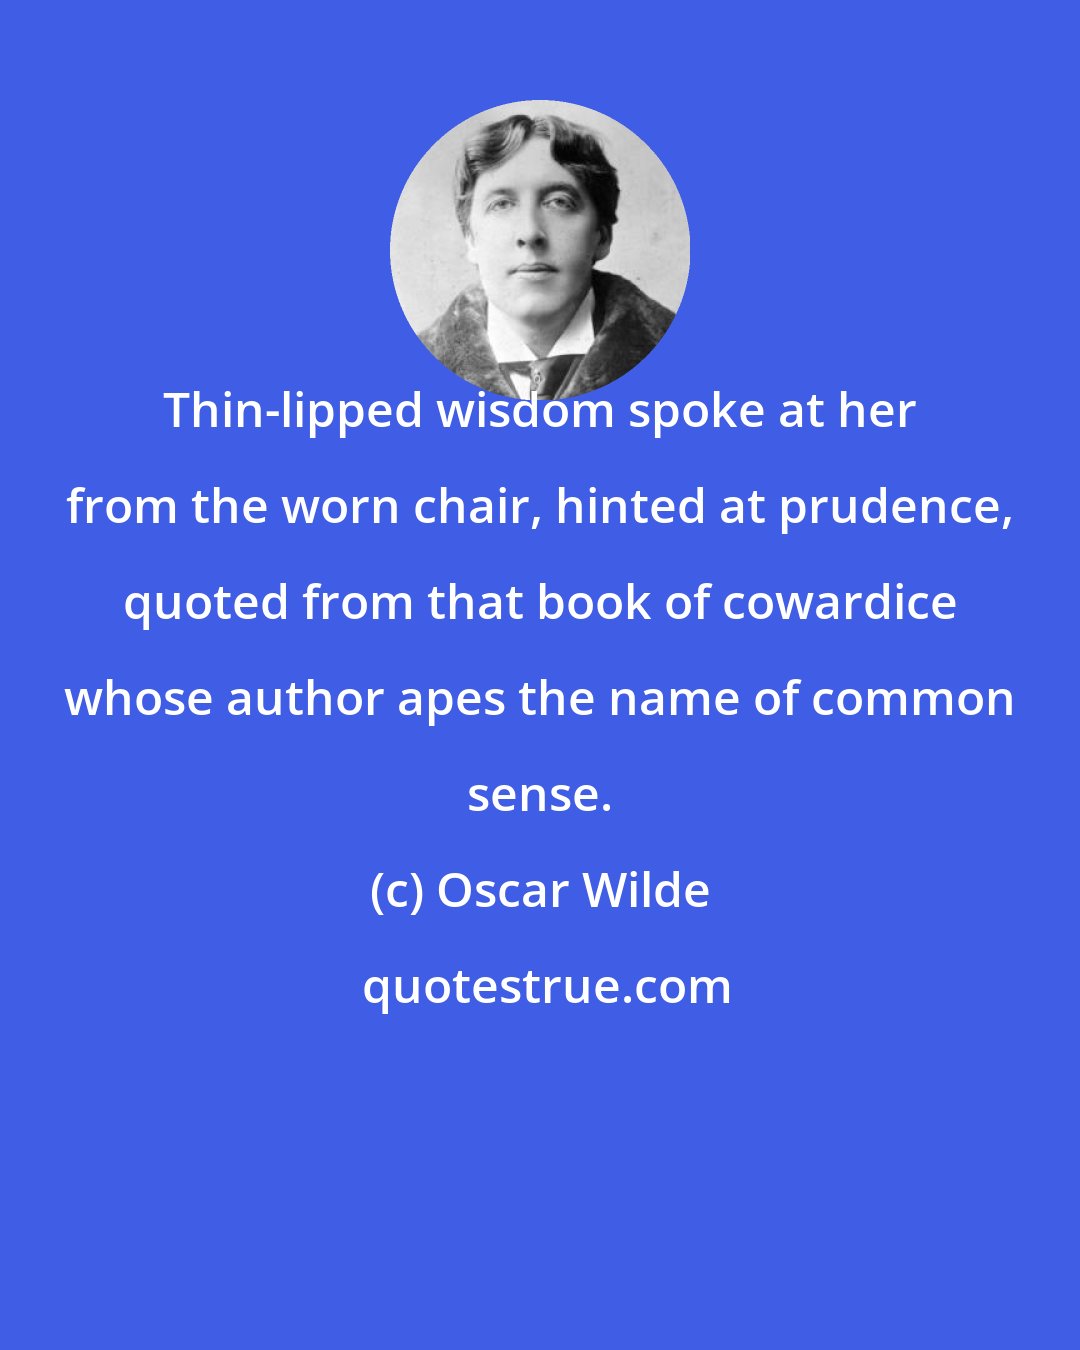 Oscar Wilde: Thin-lipped wisdom spoke at her from the worn chair, hinted at prudence, quoted from that book of cowardice whose author apes the name of common sense.